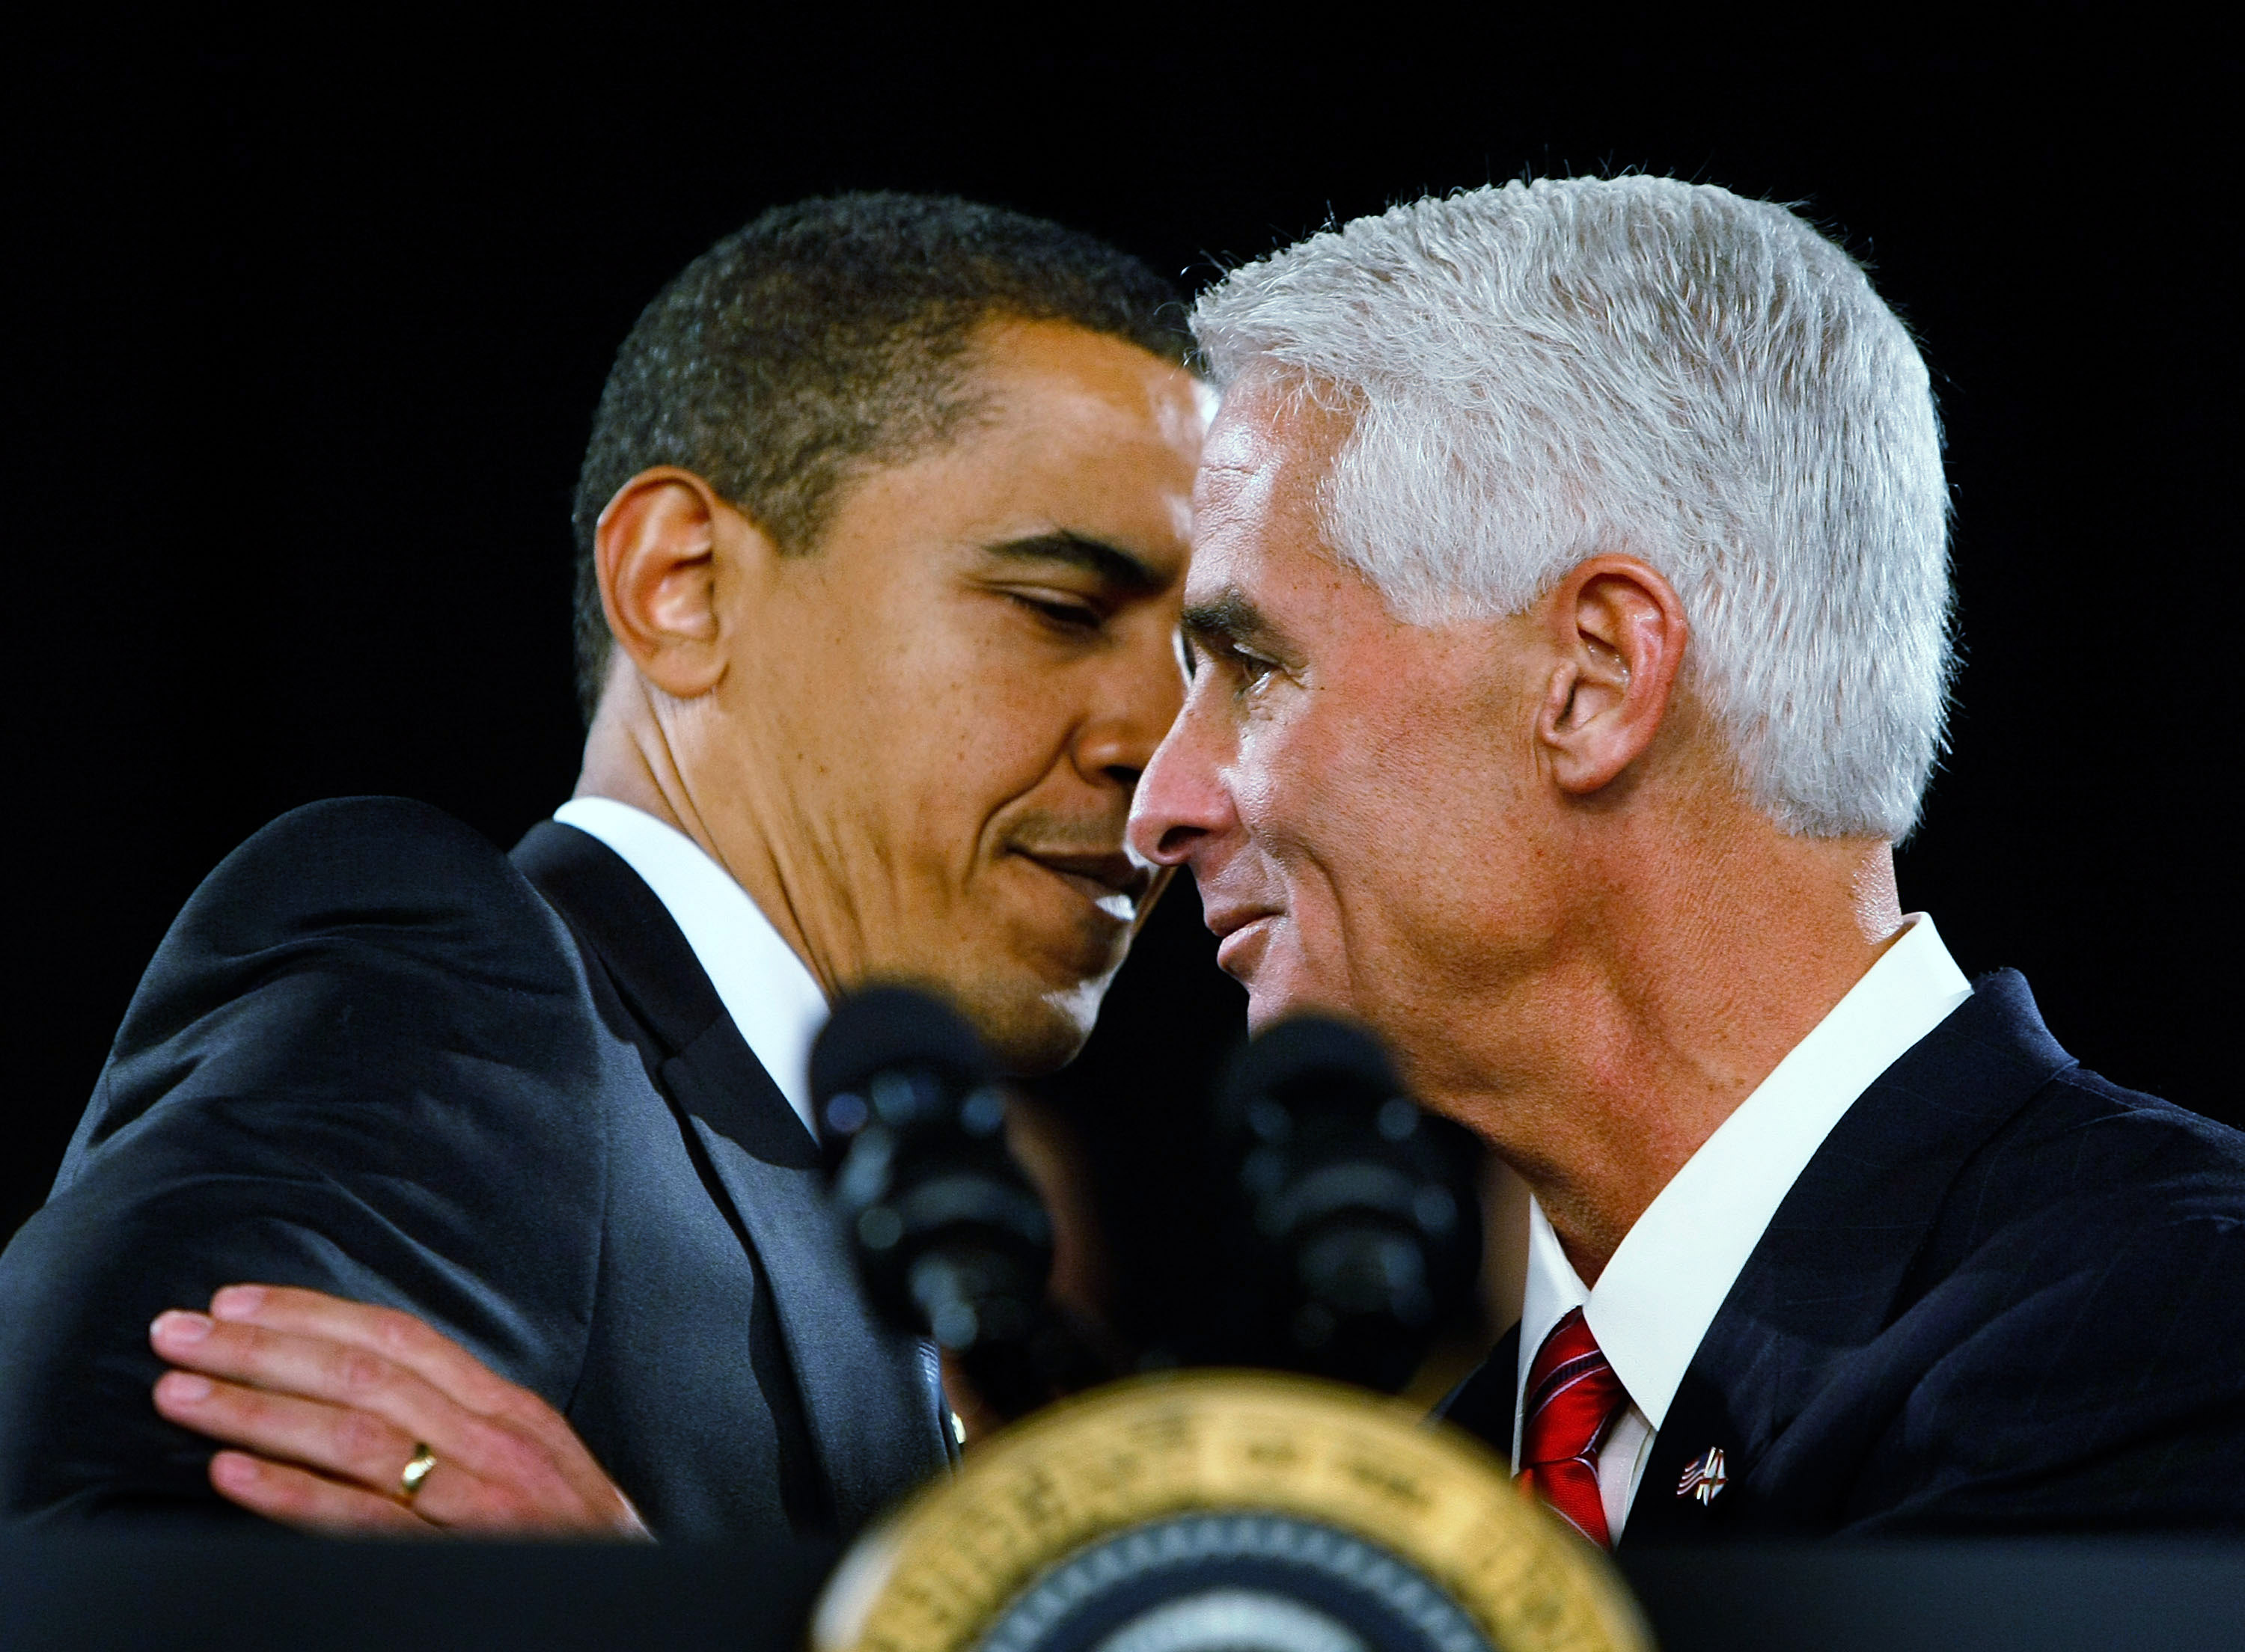 Republican Florida Governor Charlie Crist is hugged by President Barack Obama as the Governor introduces him during a Town Hall Meeting at the Harborside Event Center February 10, 2009 in Fort Myers, Fla. (Joe Raedle / Getty Images)